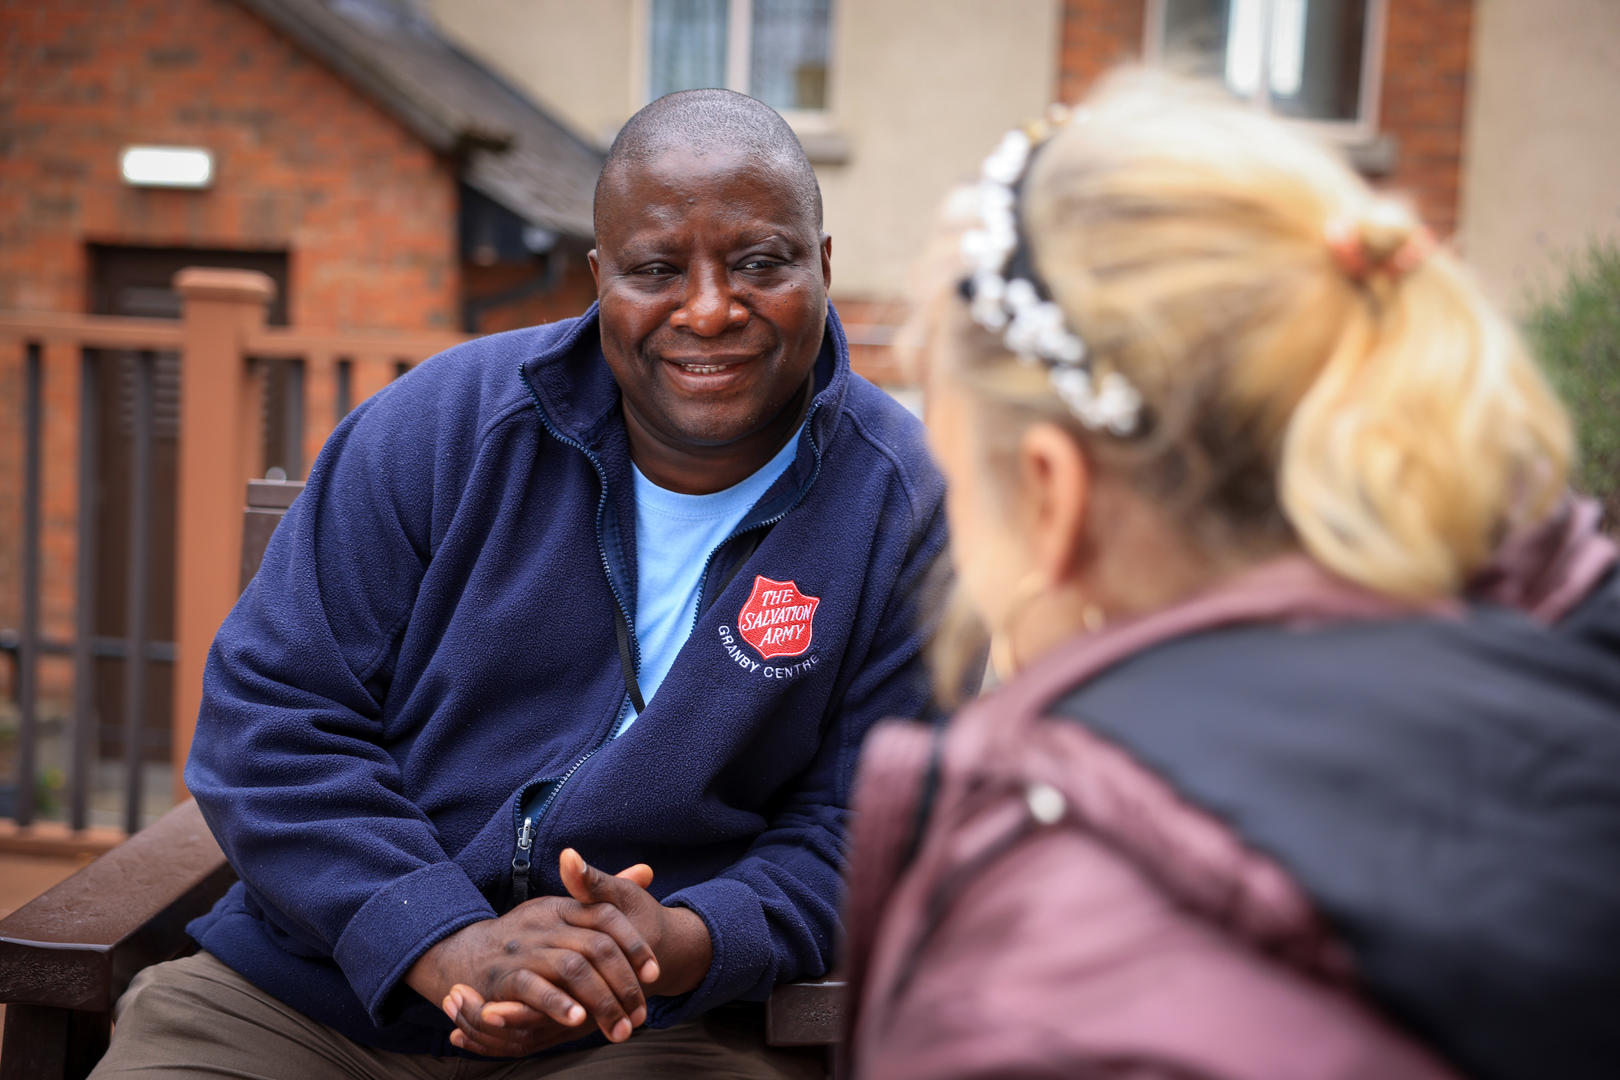 A male wearing a Salvation Army fleece with Granby Centre embroidered on it, talks with woman wearing purple coat